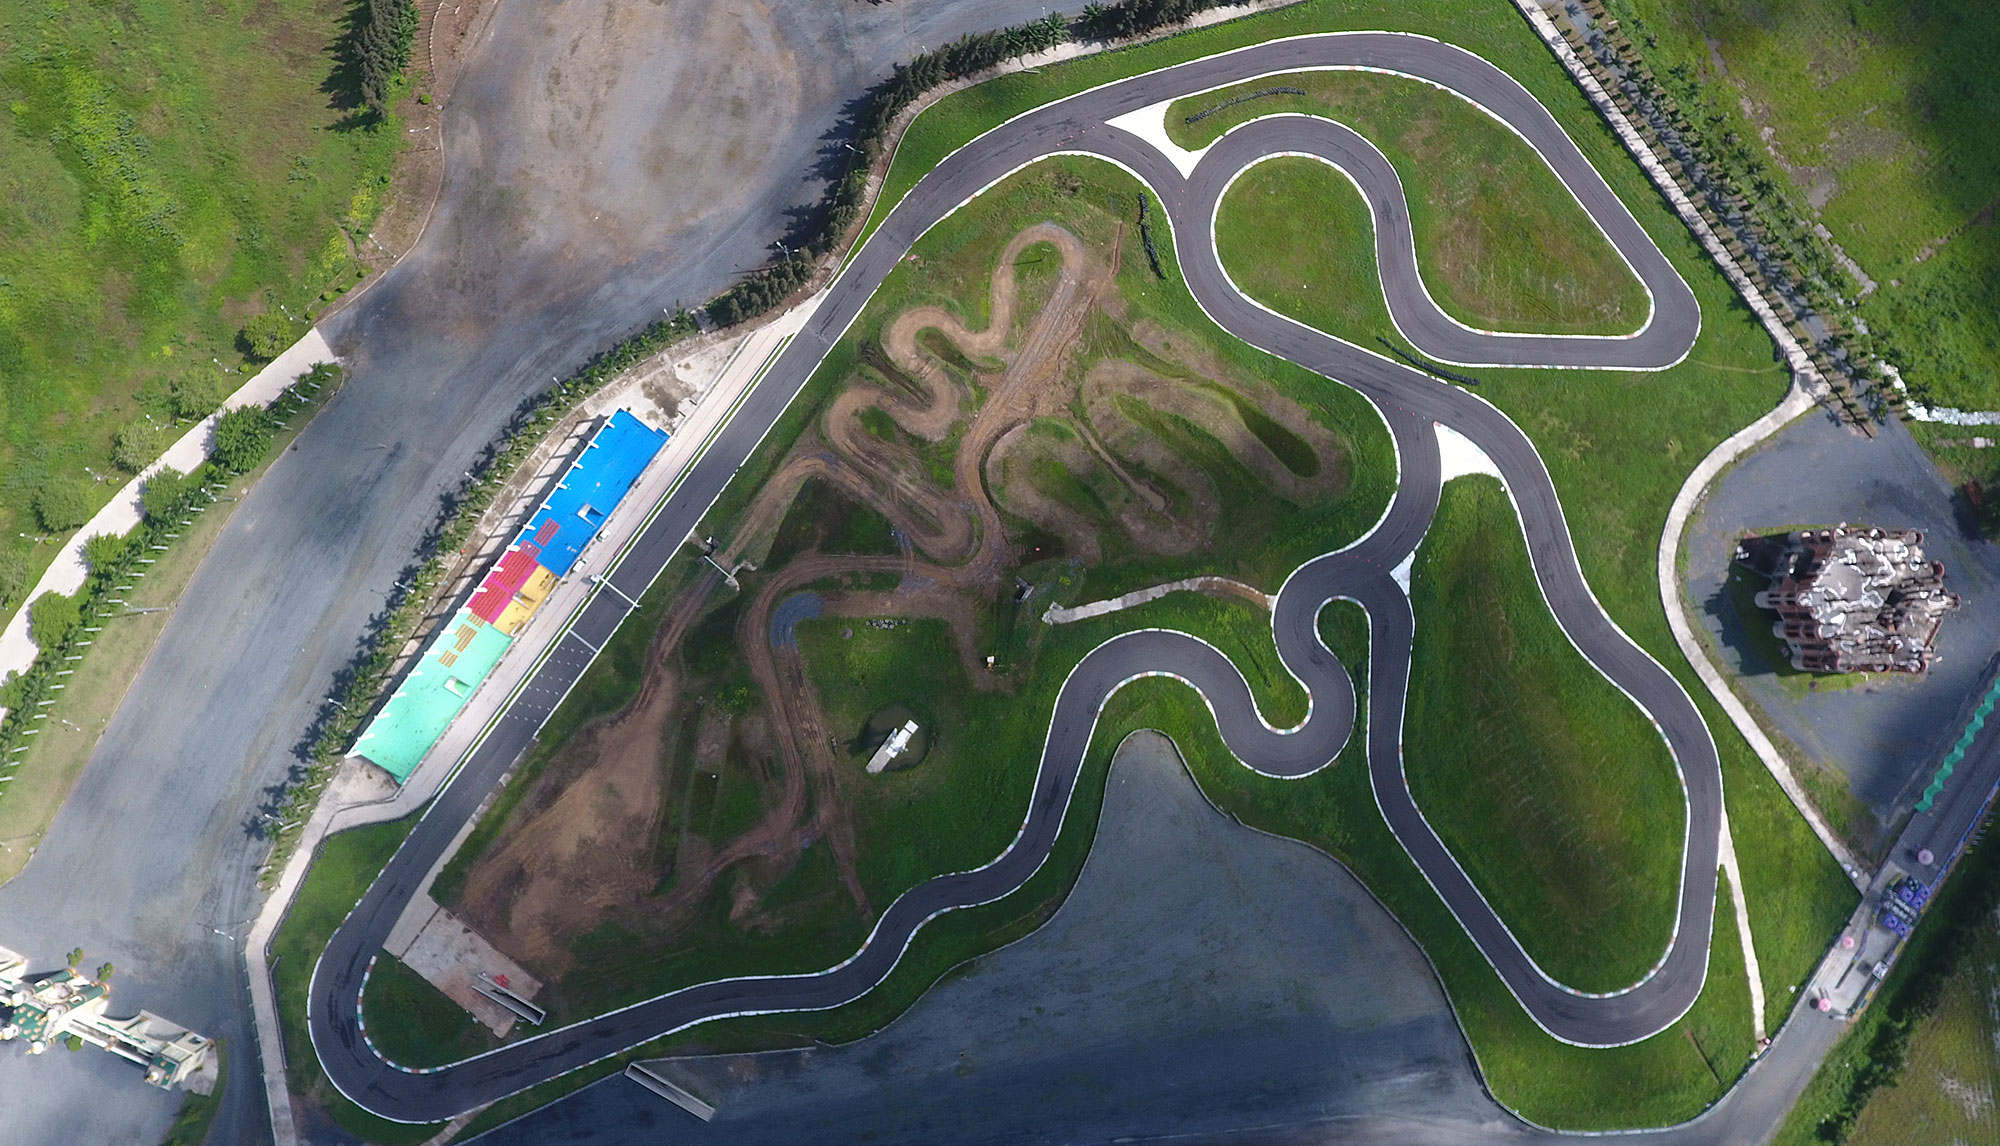 This race track is the only construction item inside Happyland that has been completed and put to use. Photo: Tuoi Tre